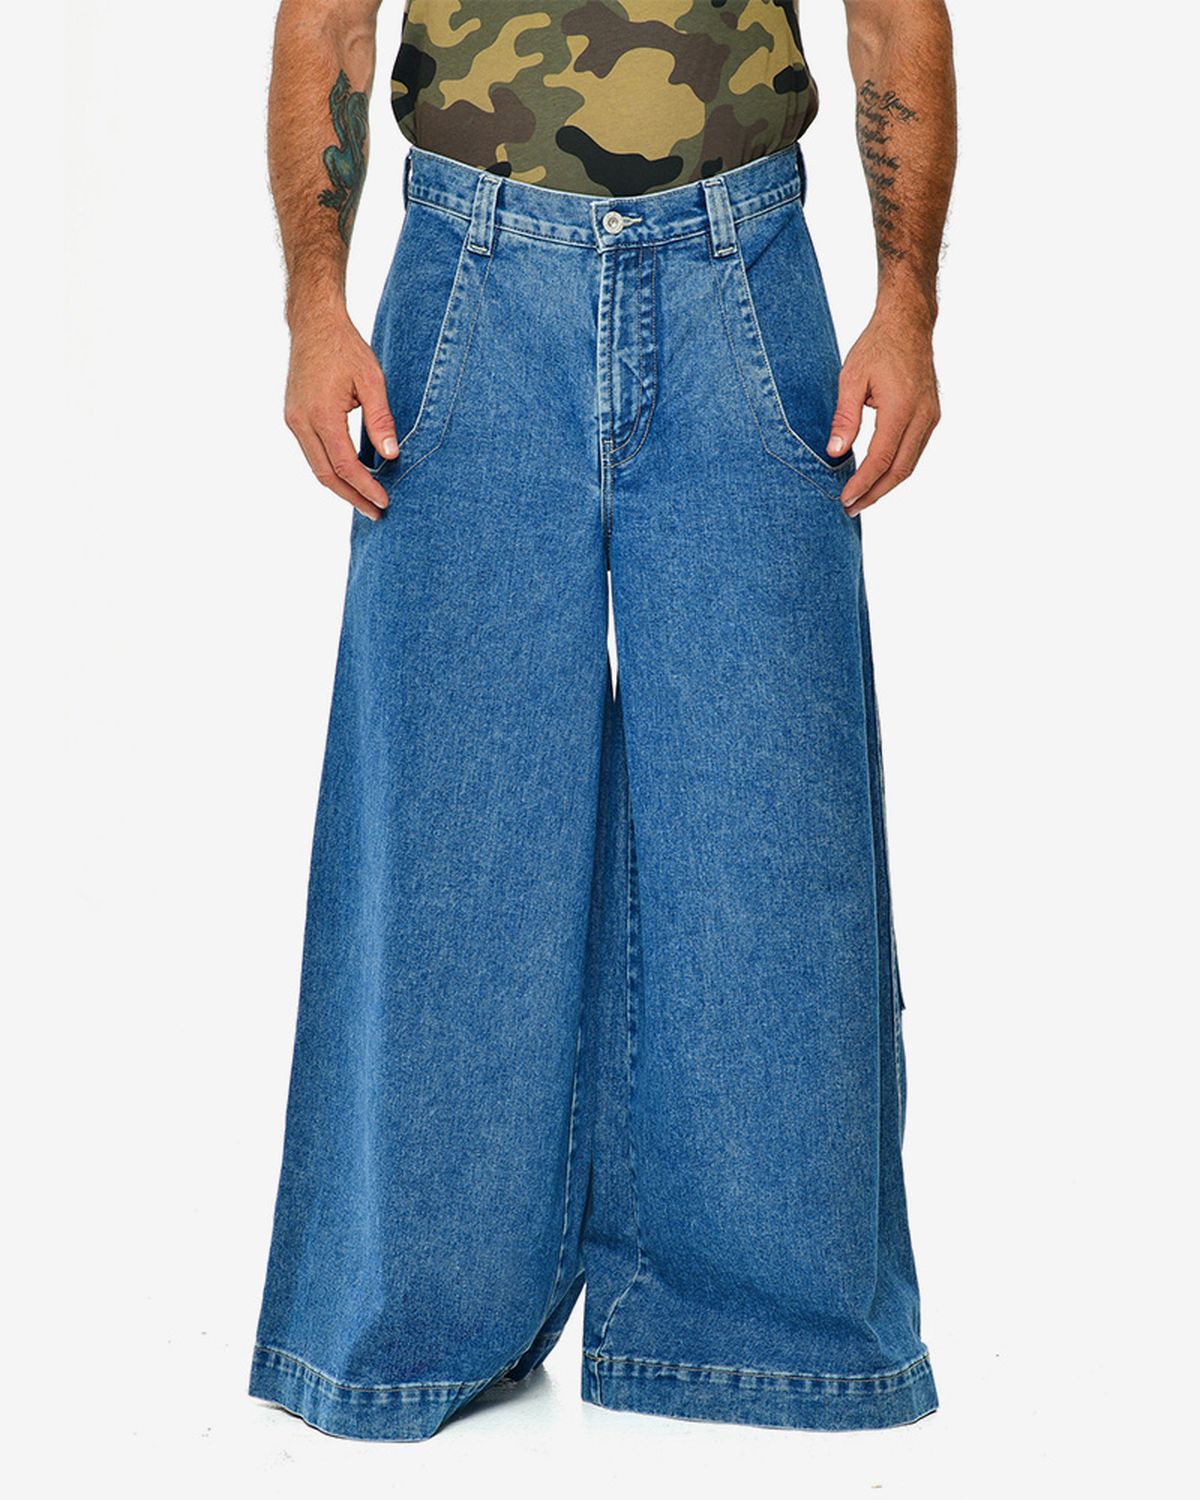 JNCO: Everything You Need to Know About the Iconic Jeans